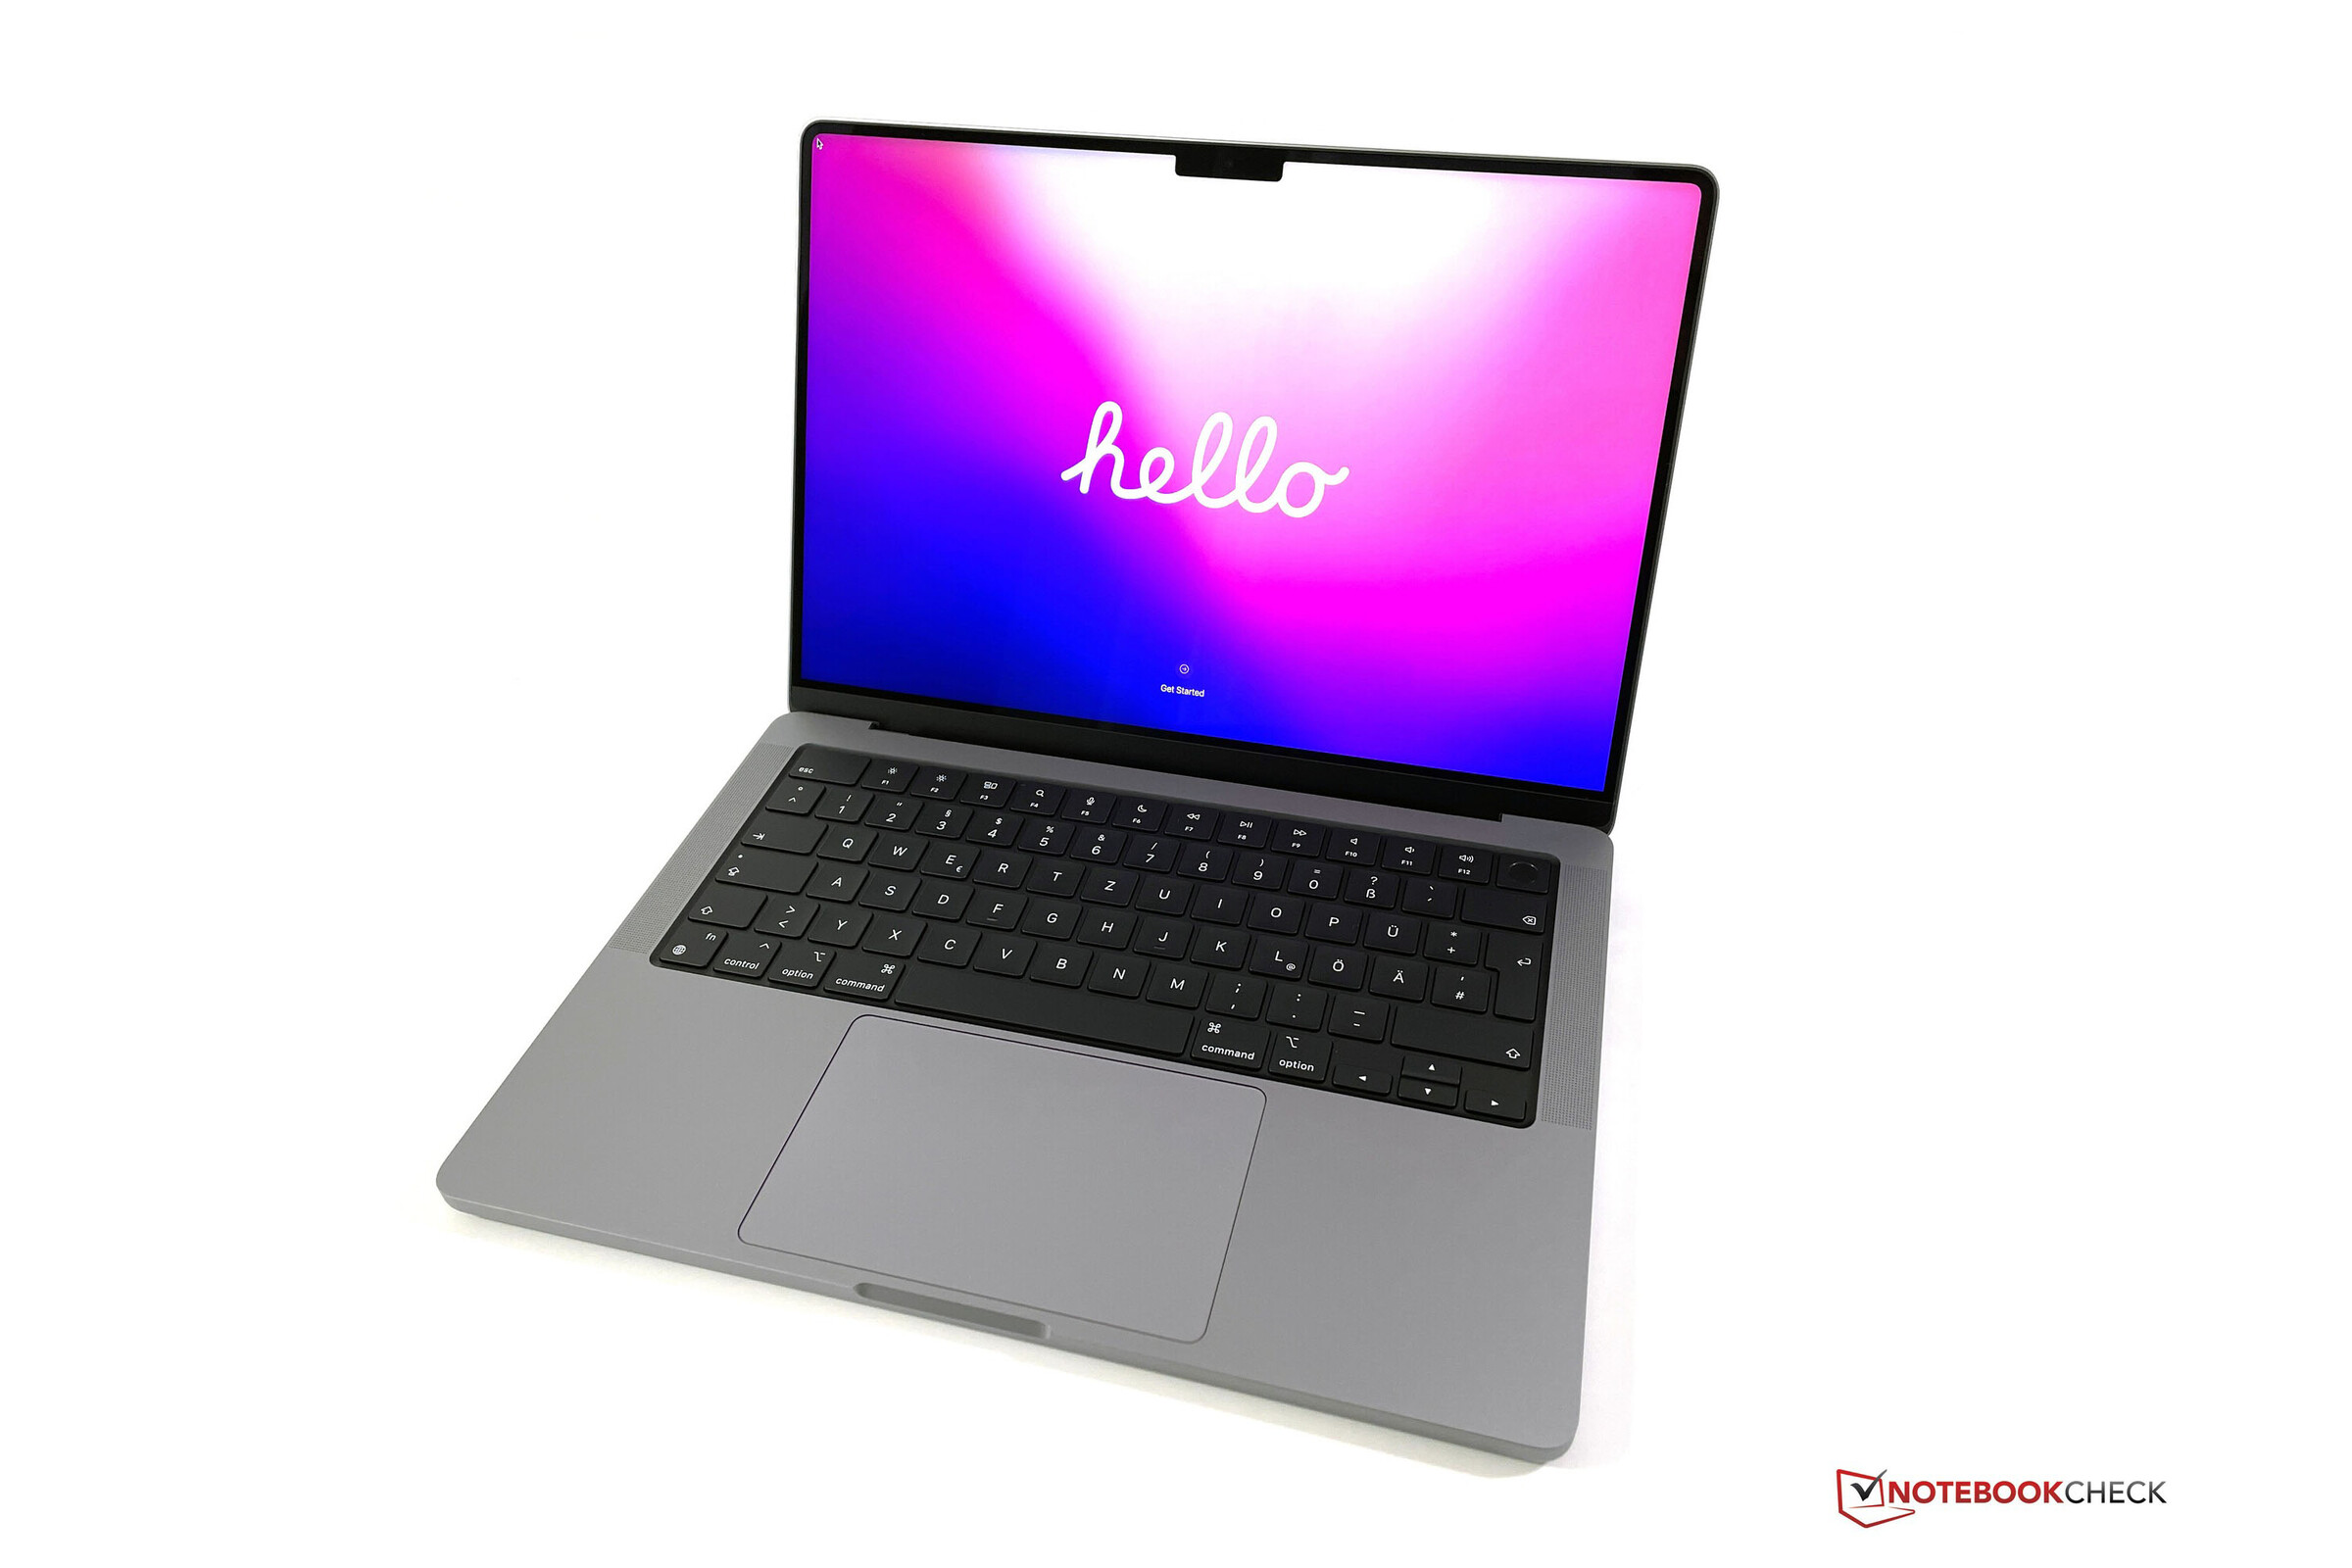 M2 MacBook Air With White Notch Reportedly Launching in September